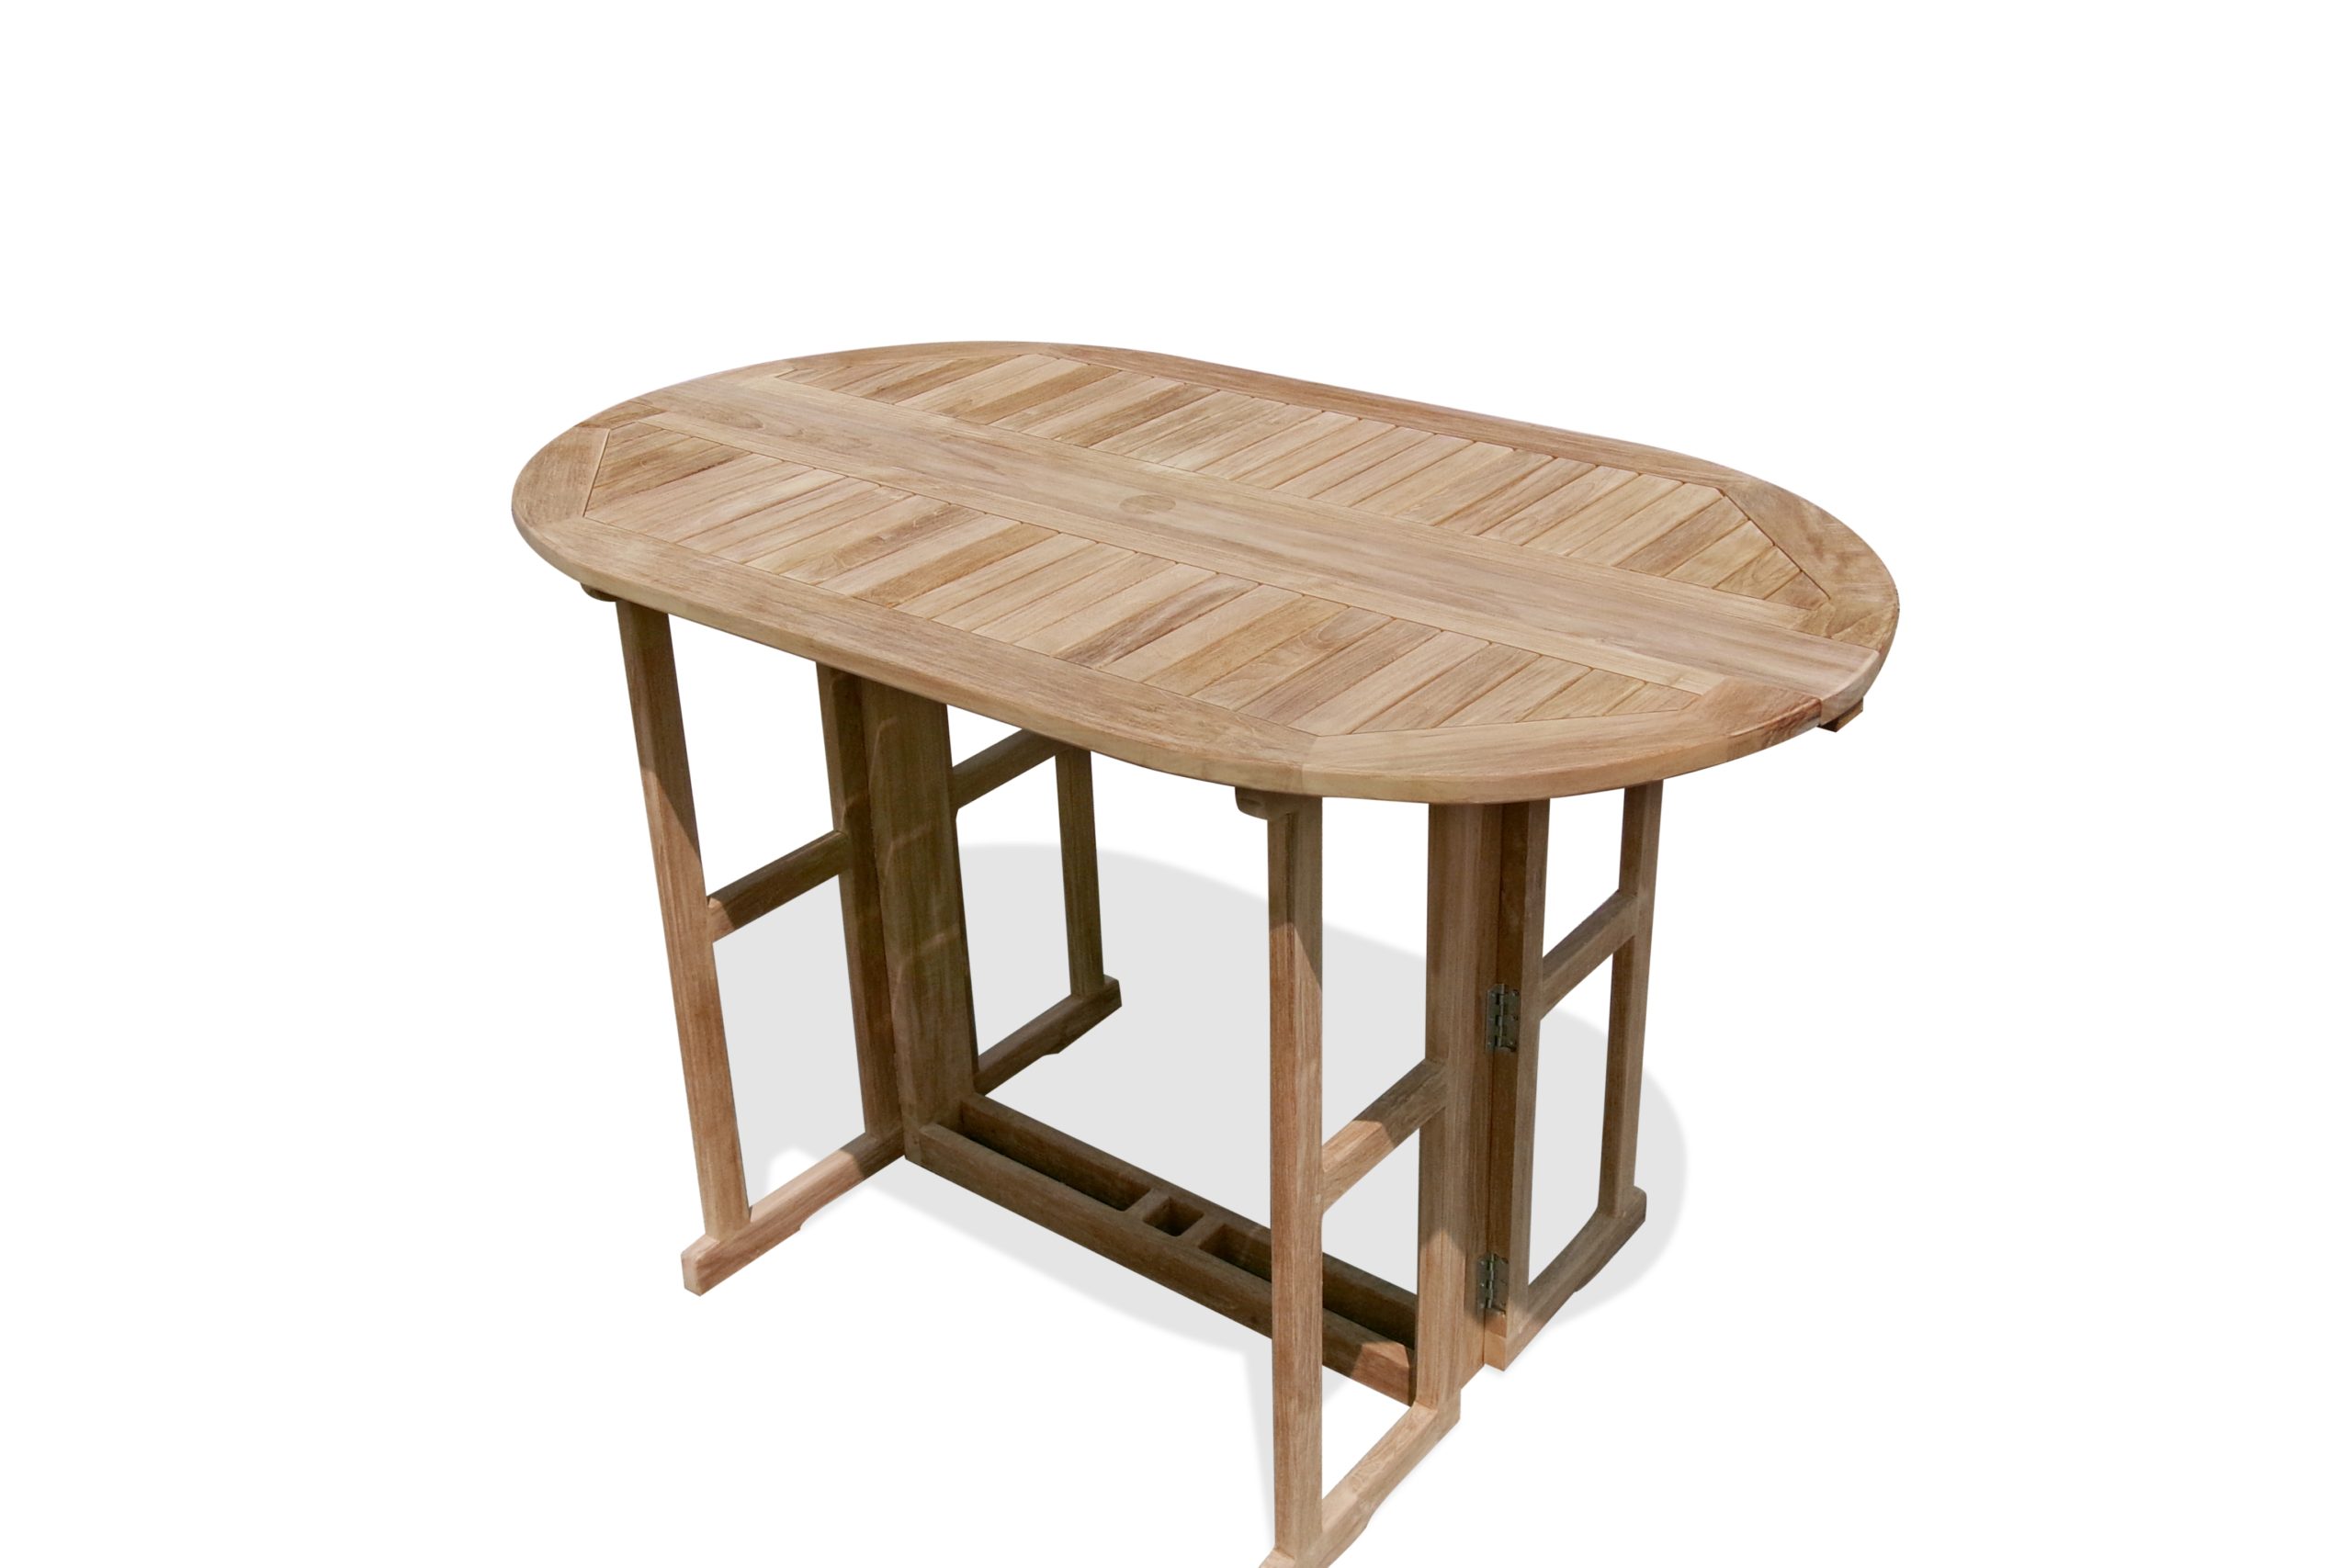 Nassau 60" x 35" Oval Drop Leaf Folding Bar Height Table...use with 1 Leaf Up or 2.... Makes 2 different tables